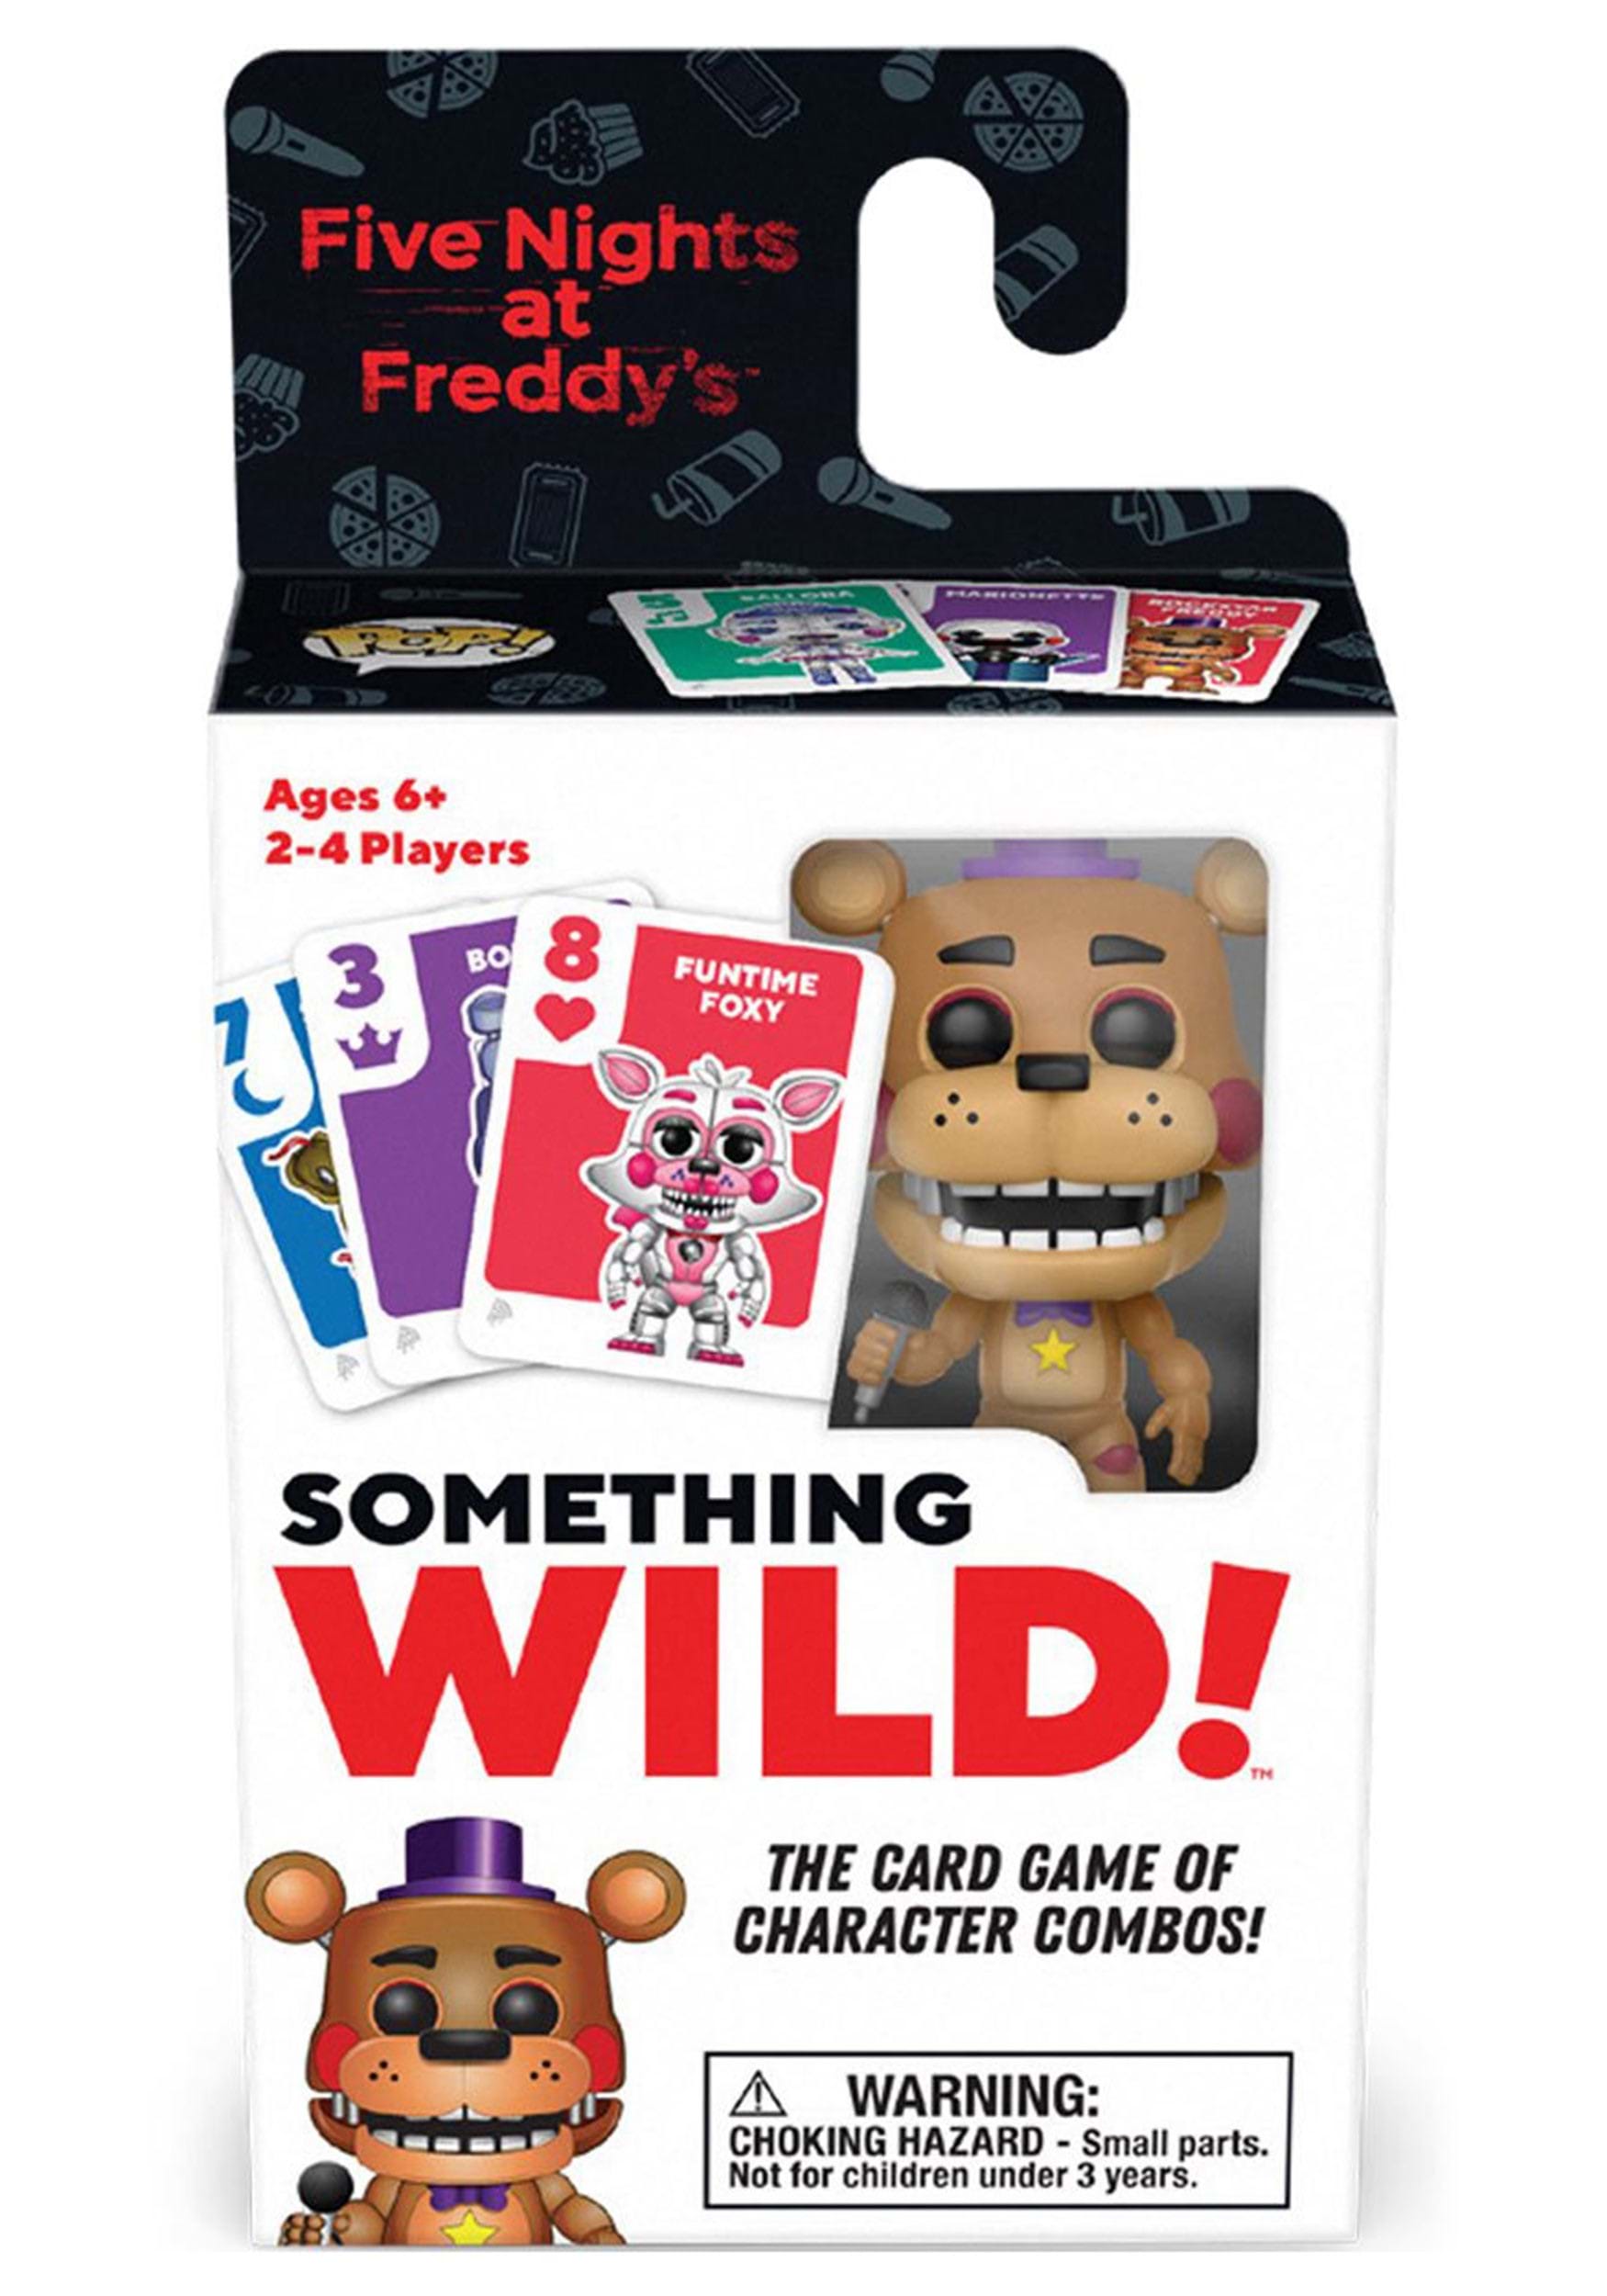 REVIEW OF FIVE NIGHTS AT FREDDY'S - Card Game DB